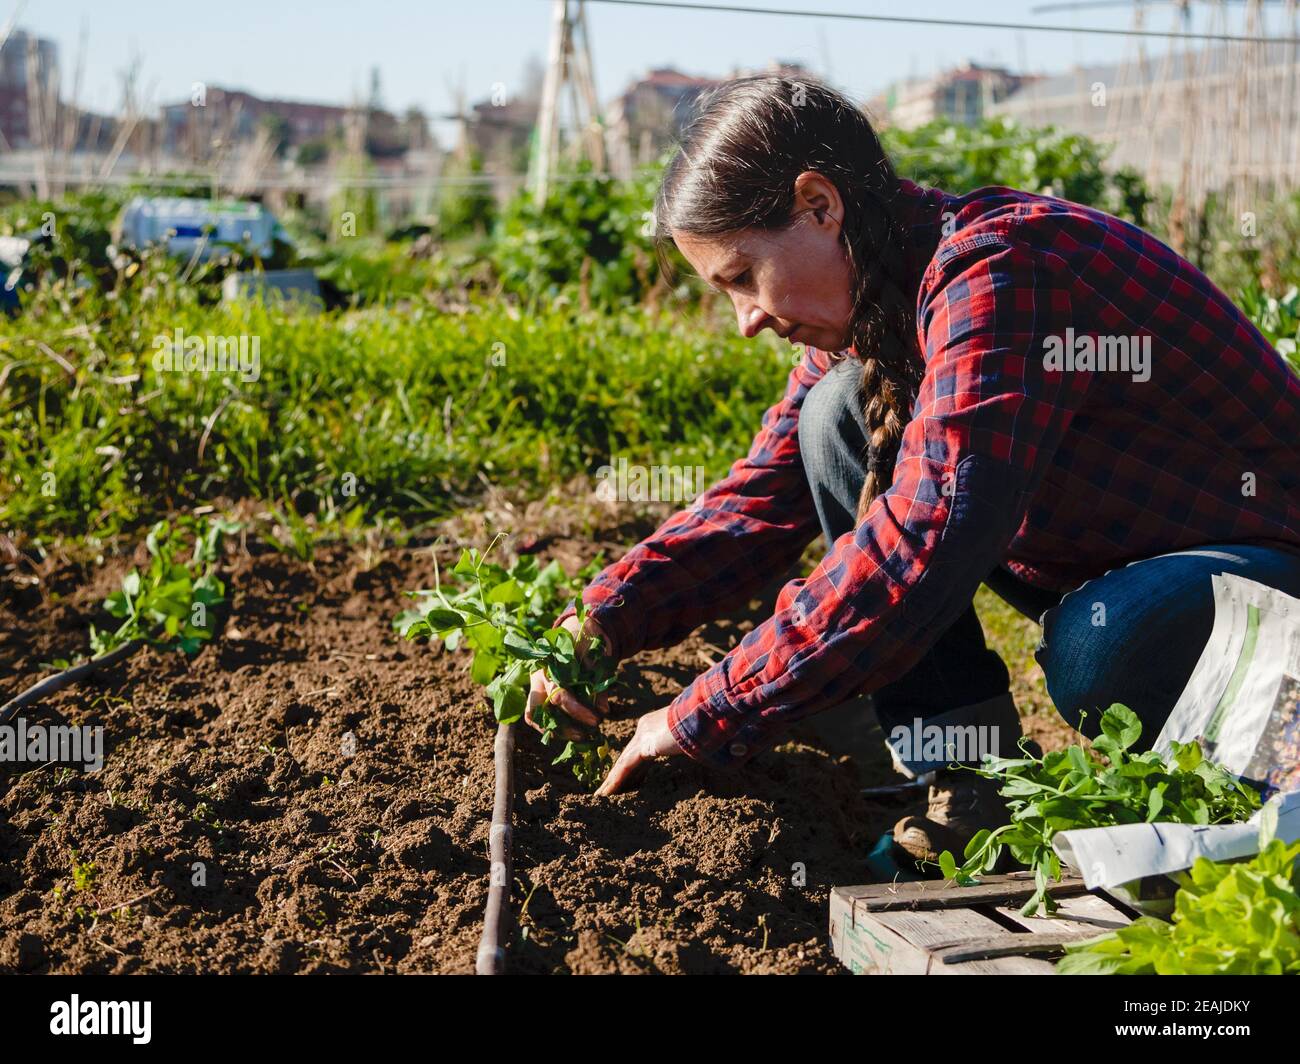 Young woman with red shirt gardening in sunny urban garden; concept: sustainable authentic lifestyle Stock Photo